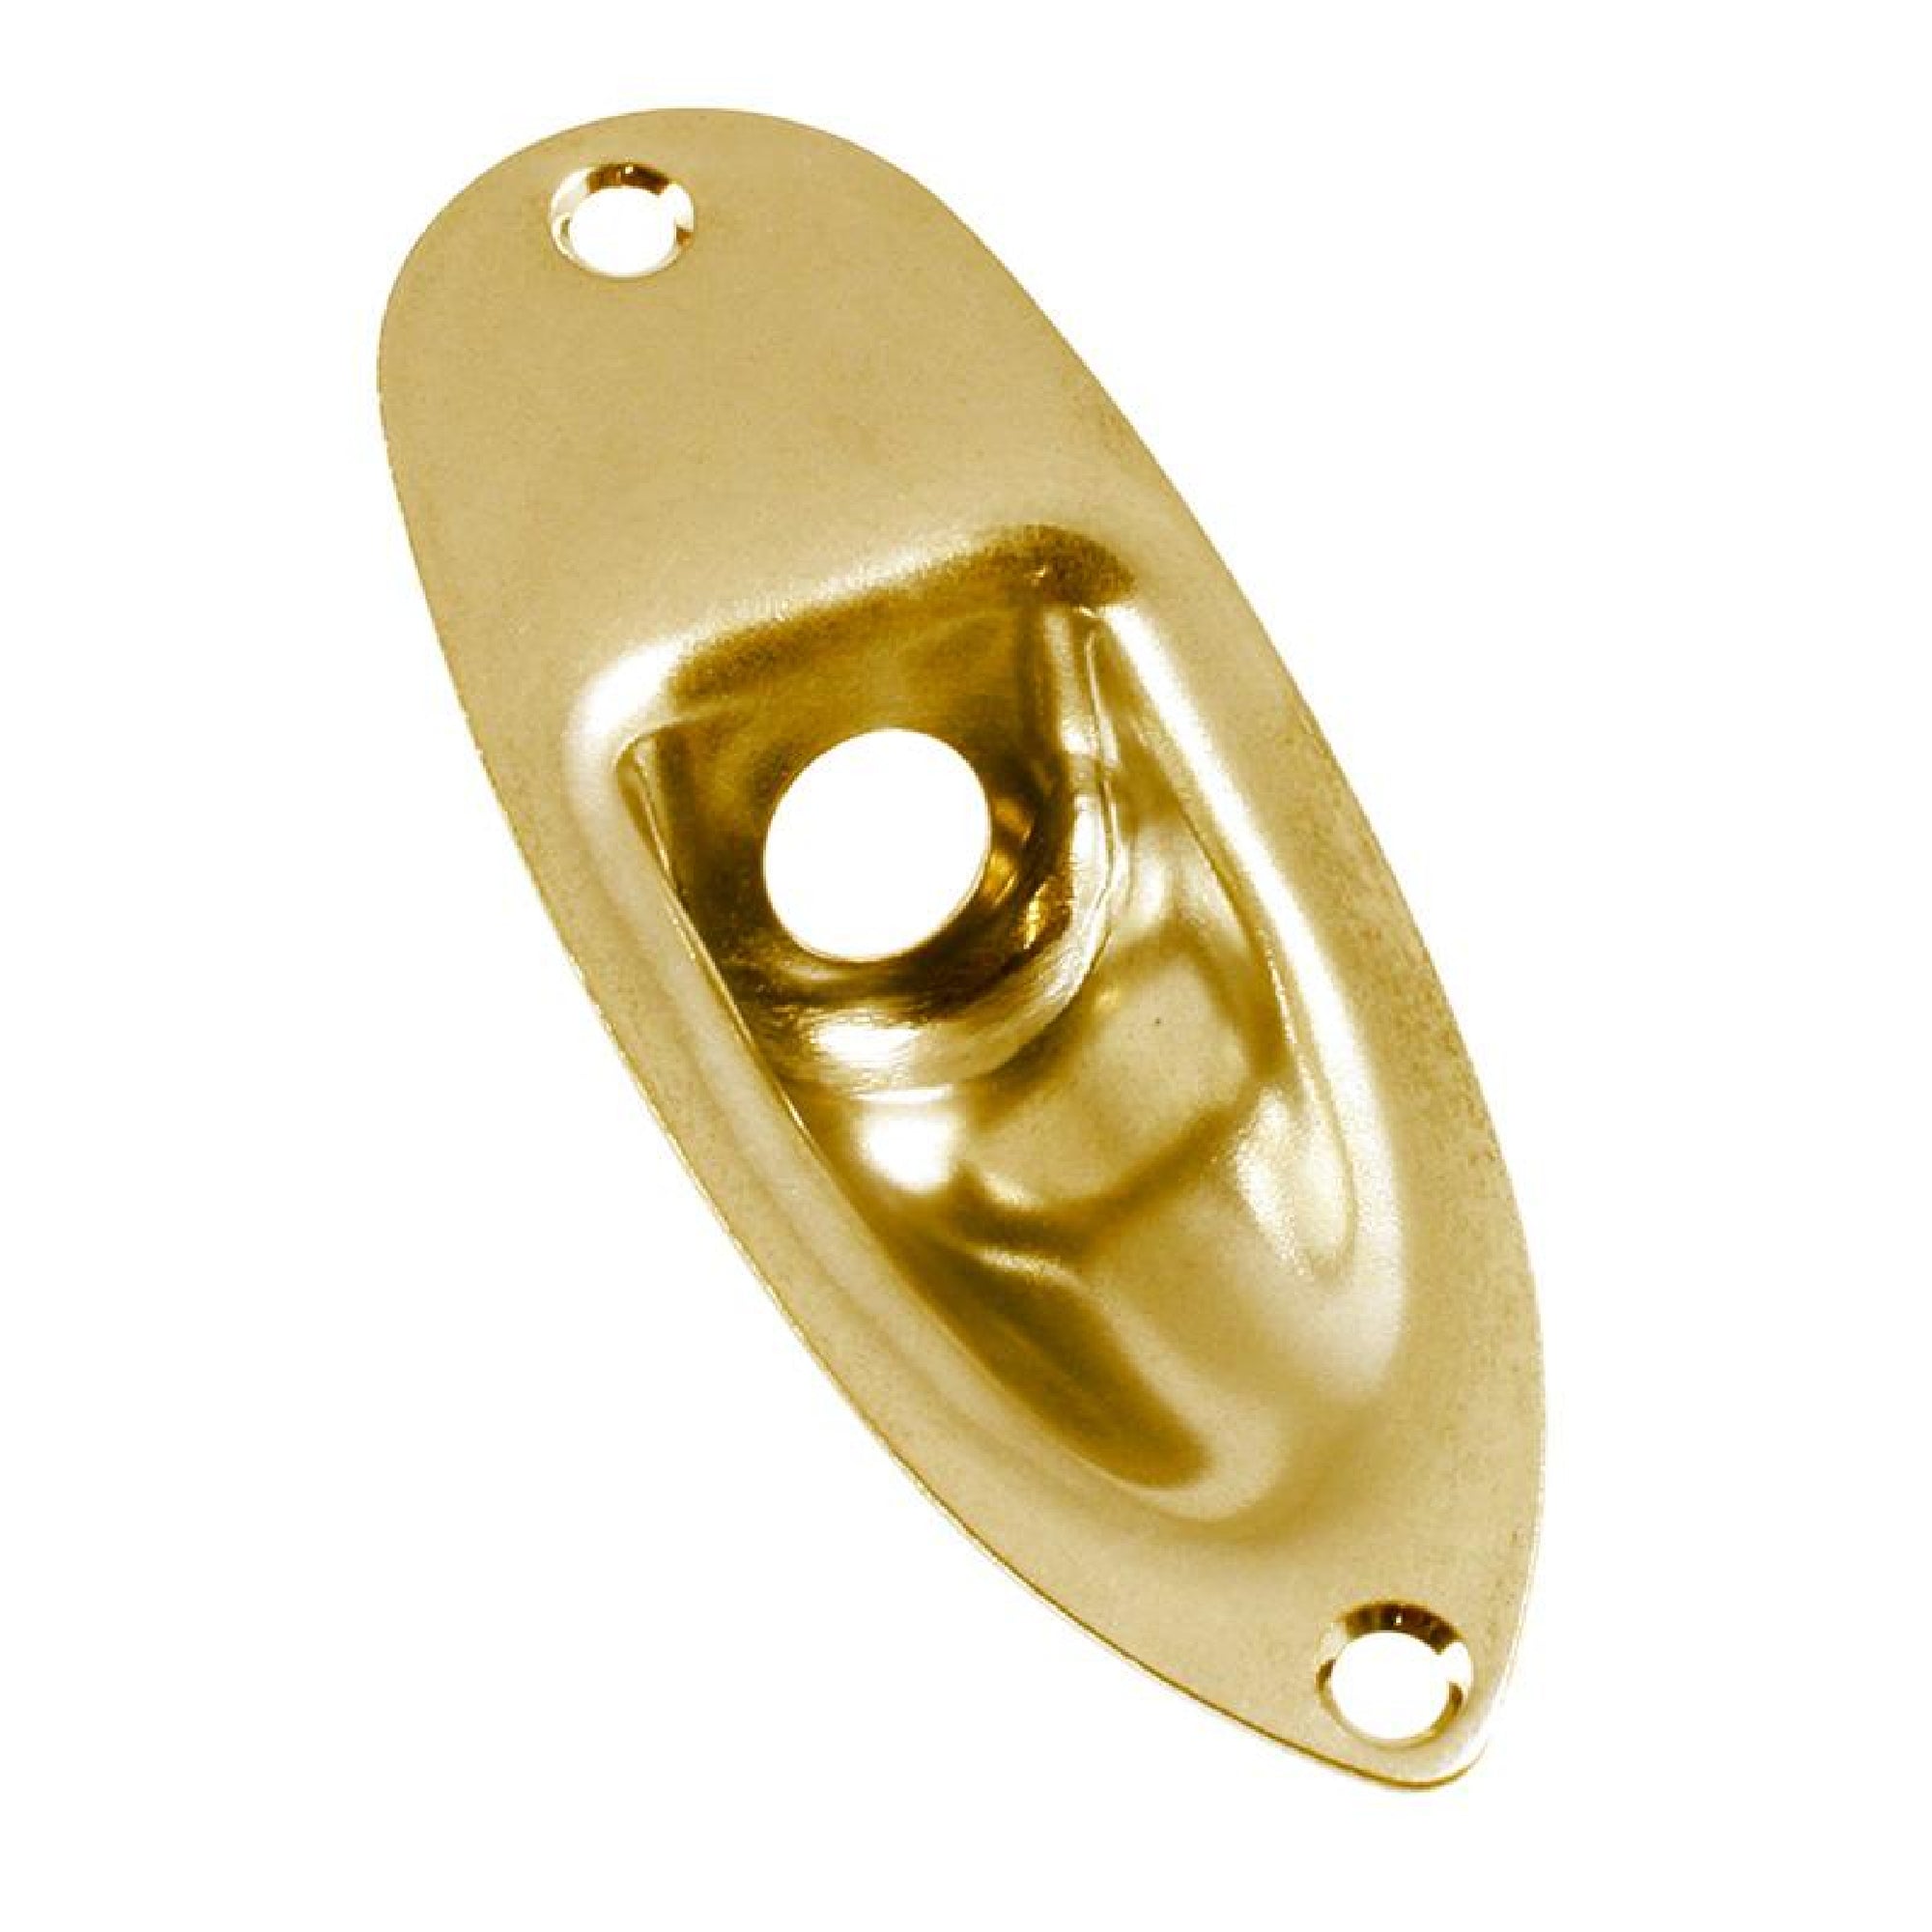 Allparts AP-0610-002 Jack Plate Football Style for Strat - Gold